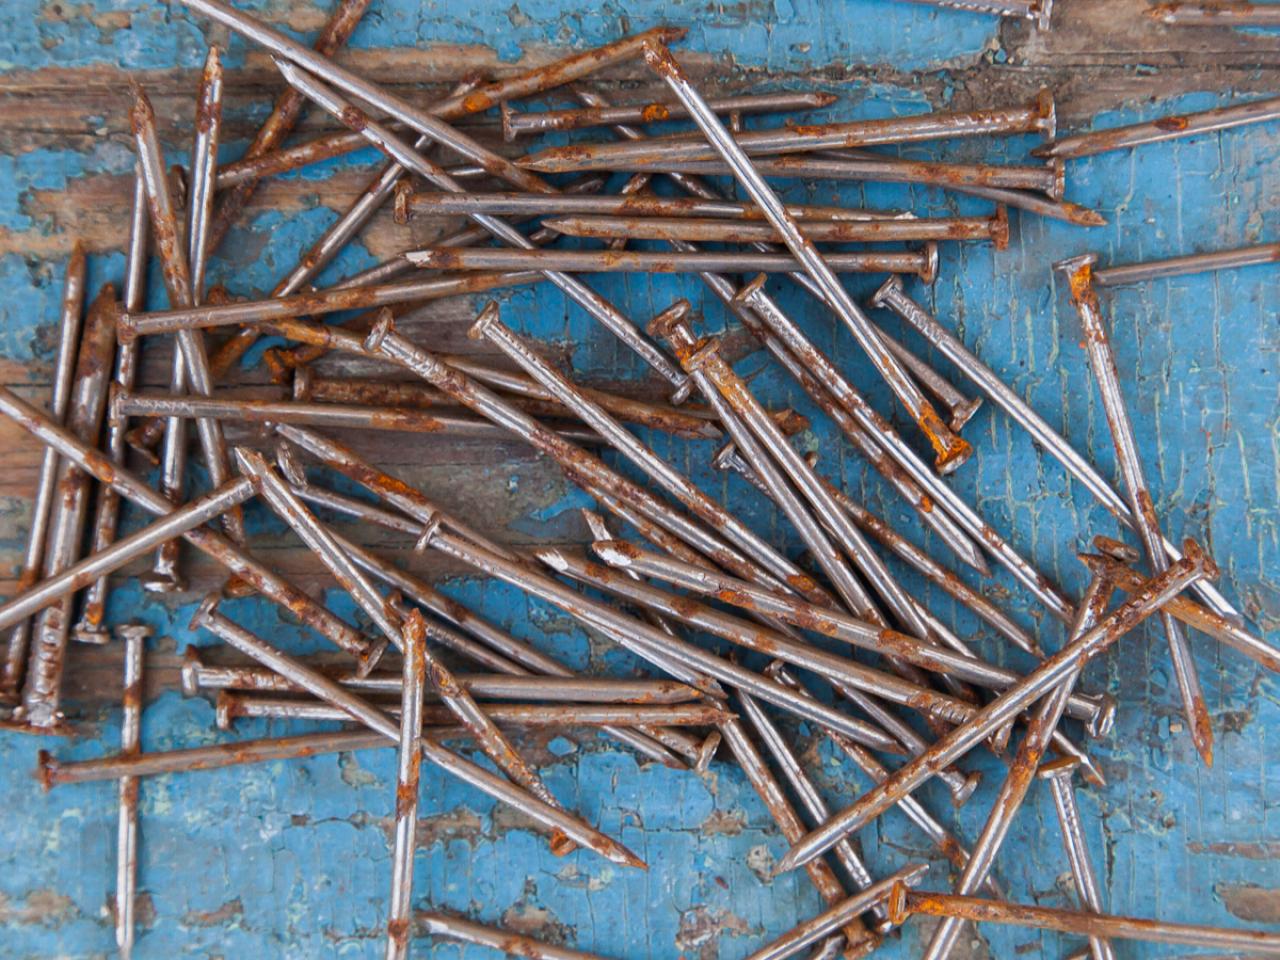 Can Dogs Get Tetanus From Stepping on a Rusty Nail? - Dog Discoveries